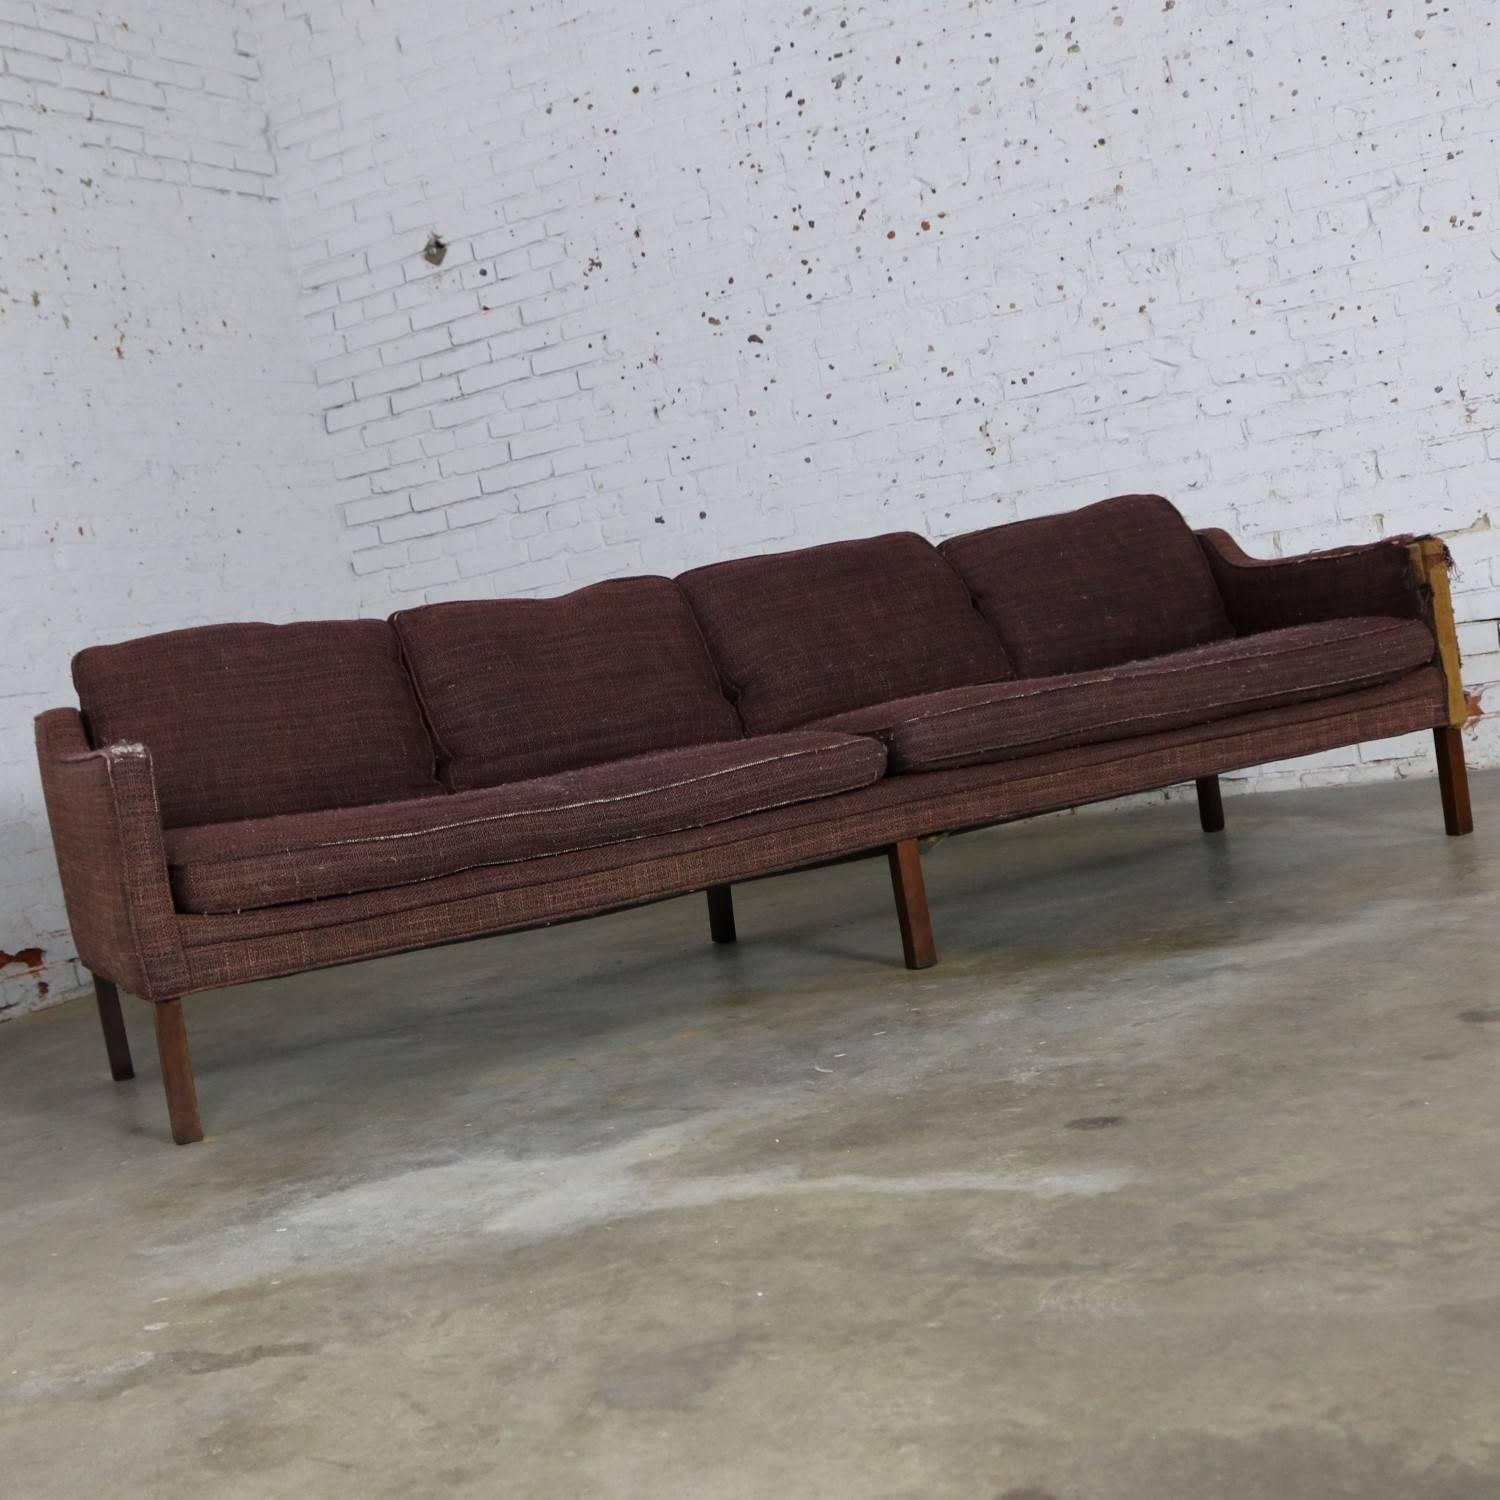 Thayer Coggin four seat Mid-Century Modern sofa frame by Milo Baughman. The upholstery is shot on this one, but the sofa frame is solid, and the lines are wonderful, circa 1960s-1970s.

Just look at the style and presence of this sofa! Even in its